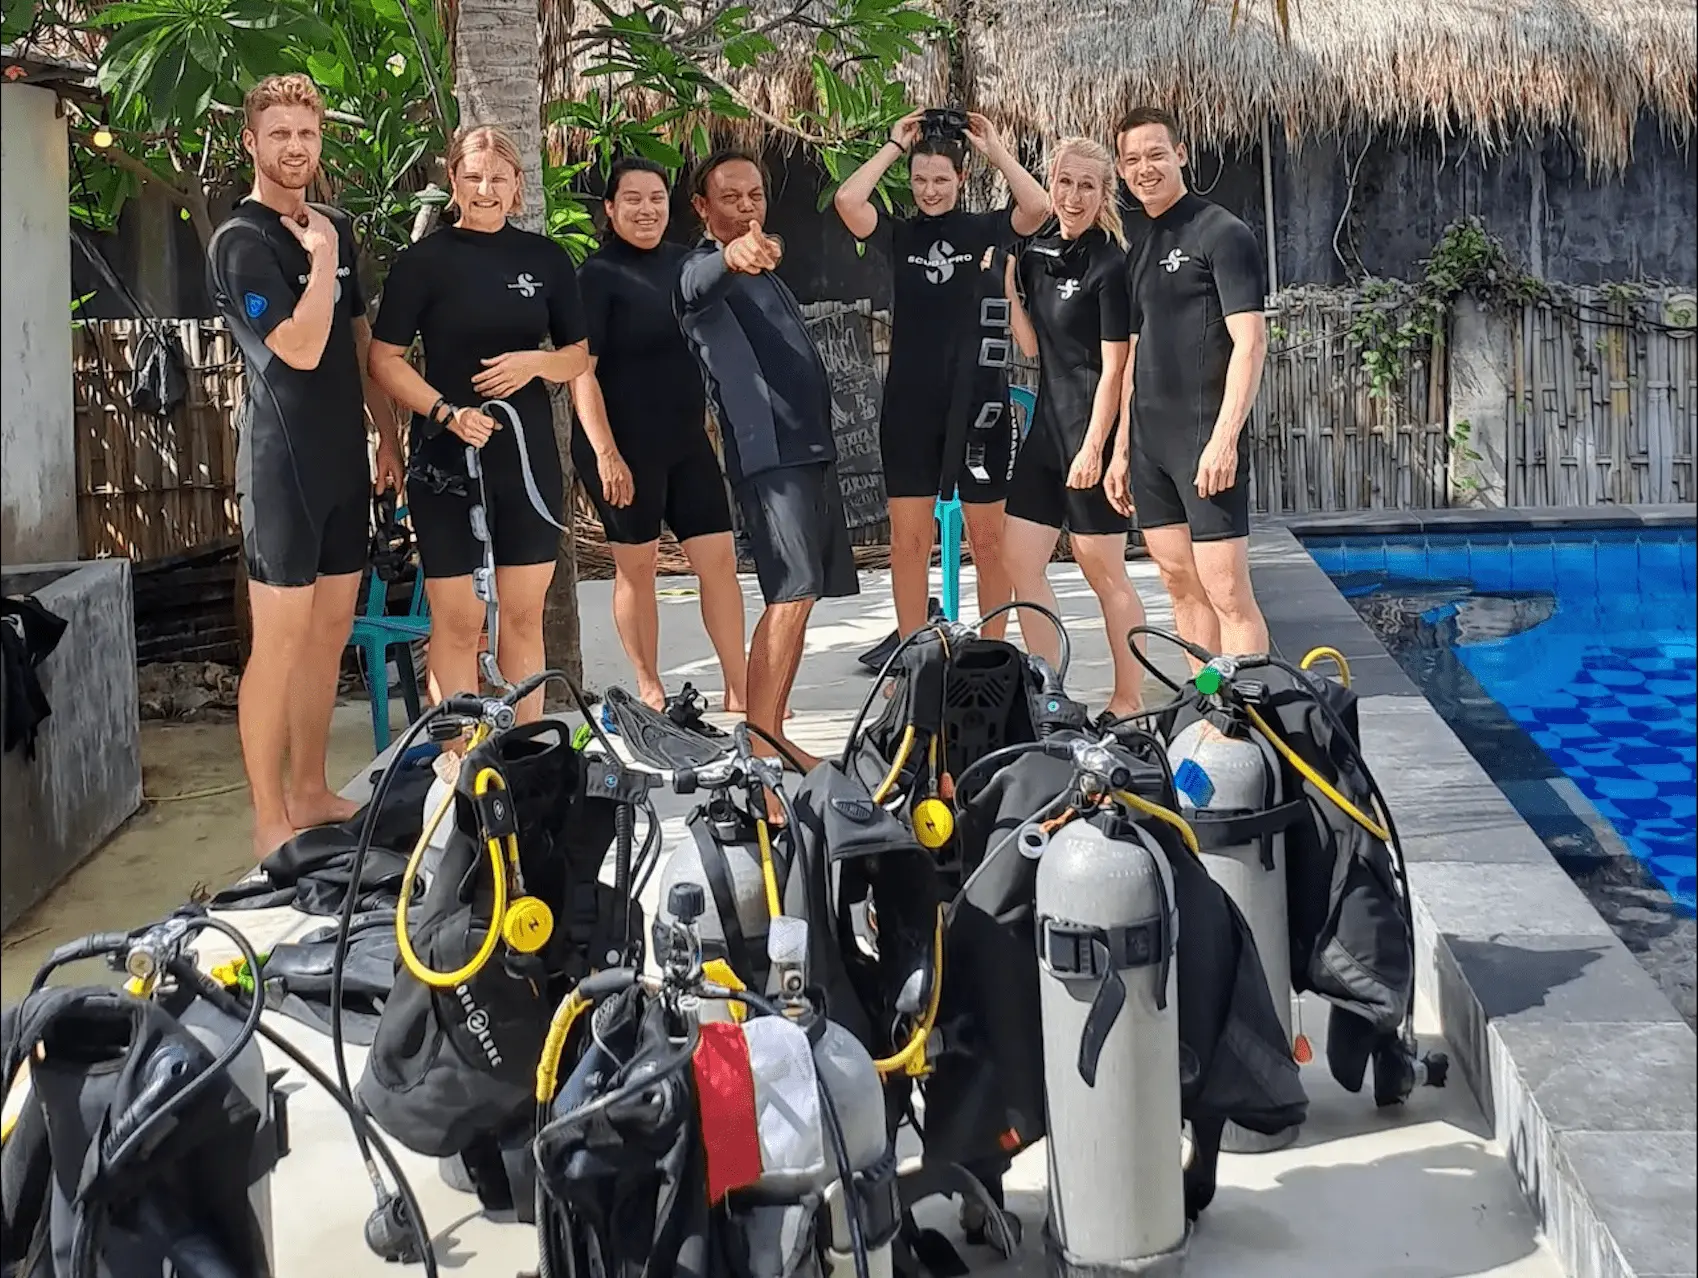 Group of Scuba Divers after their dives with their instructor